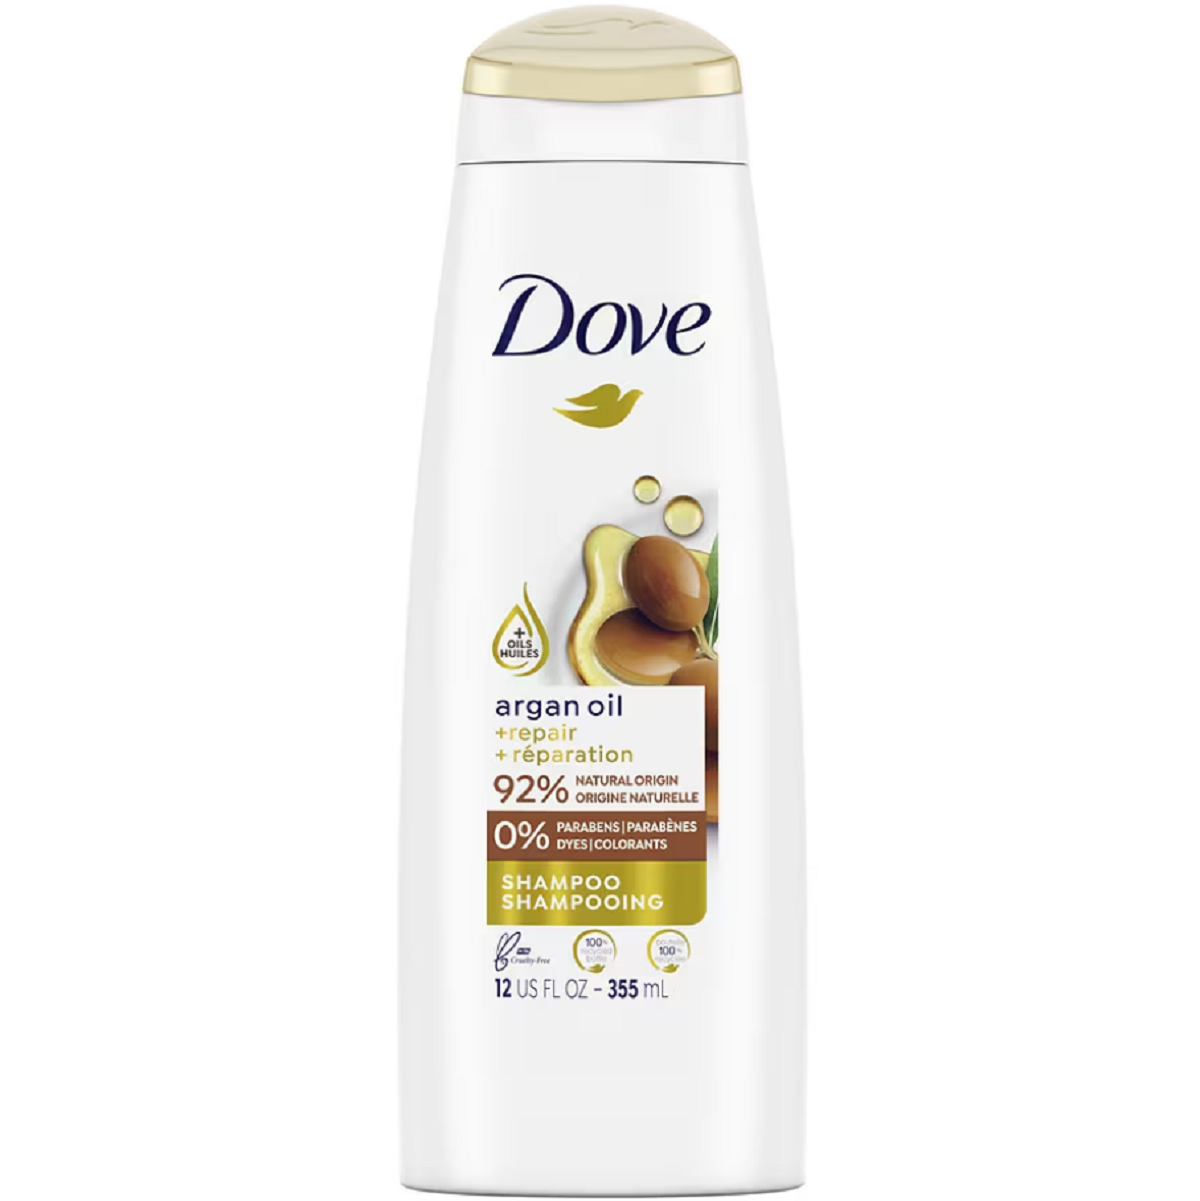 $2 Off Dove Hair Care Products Coupon